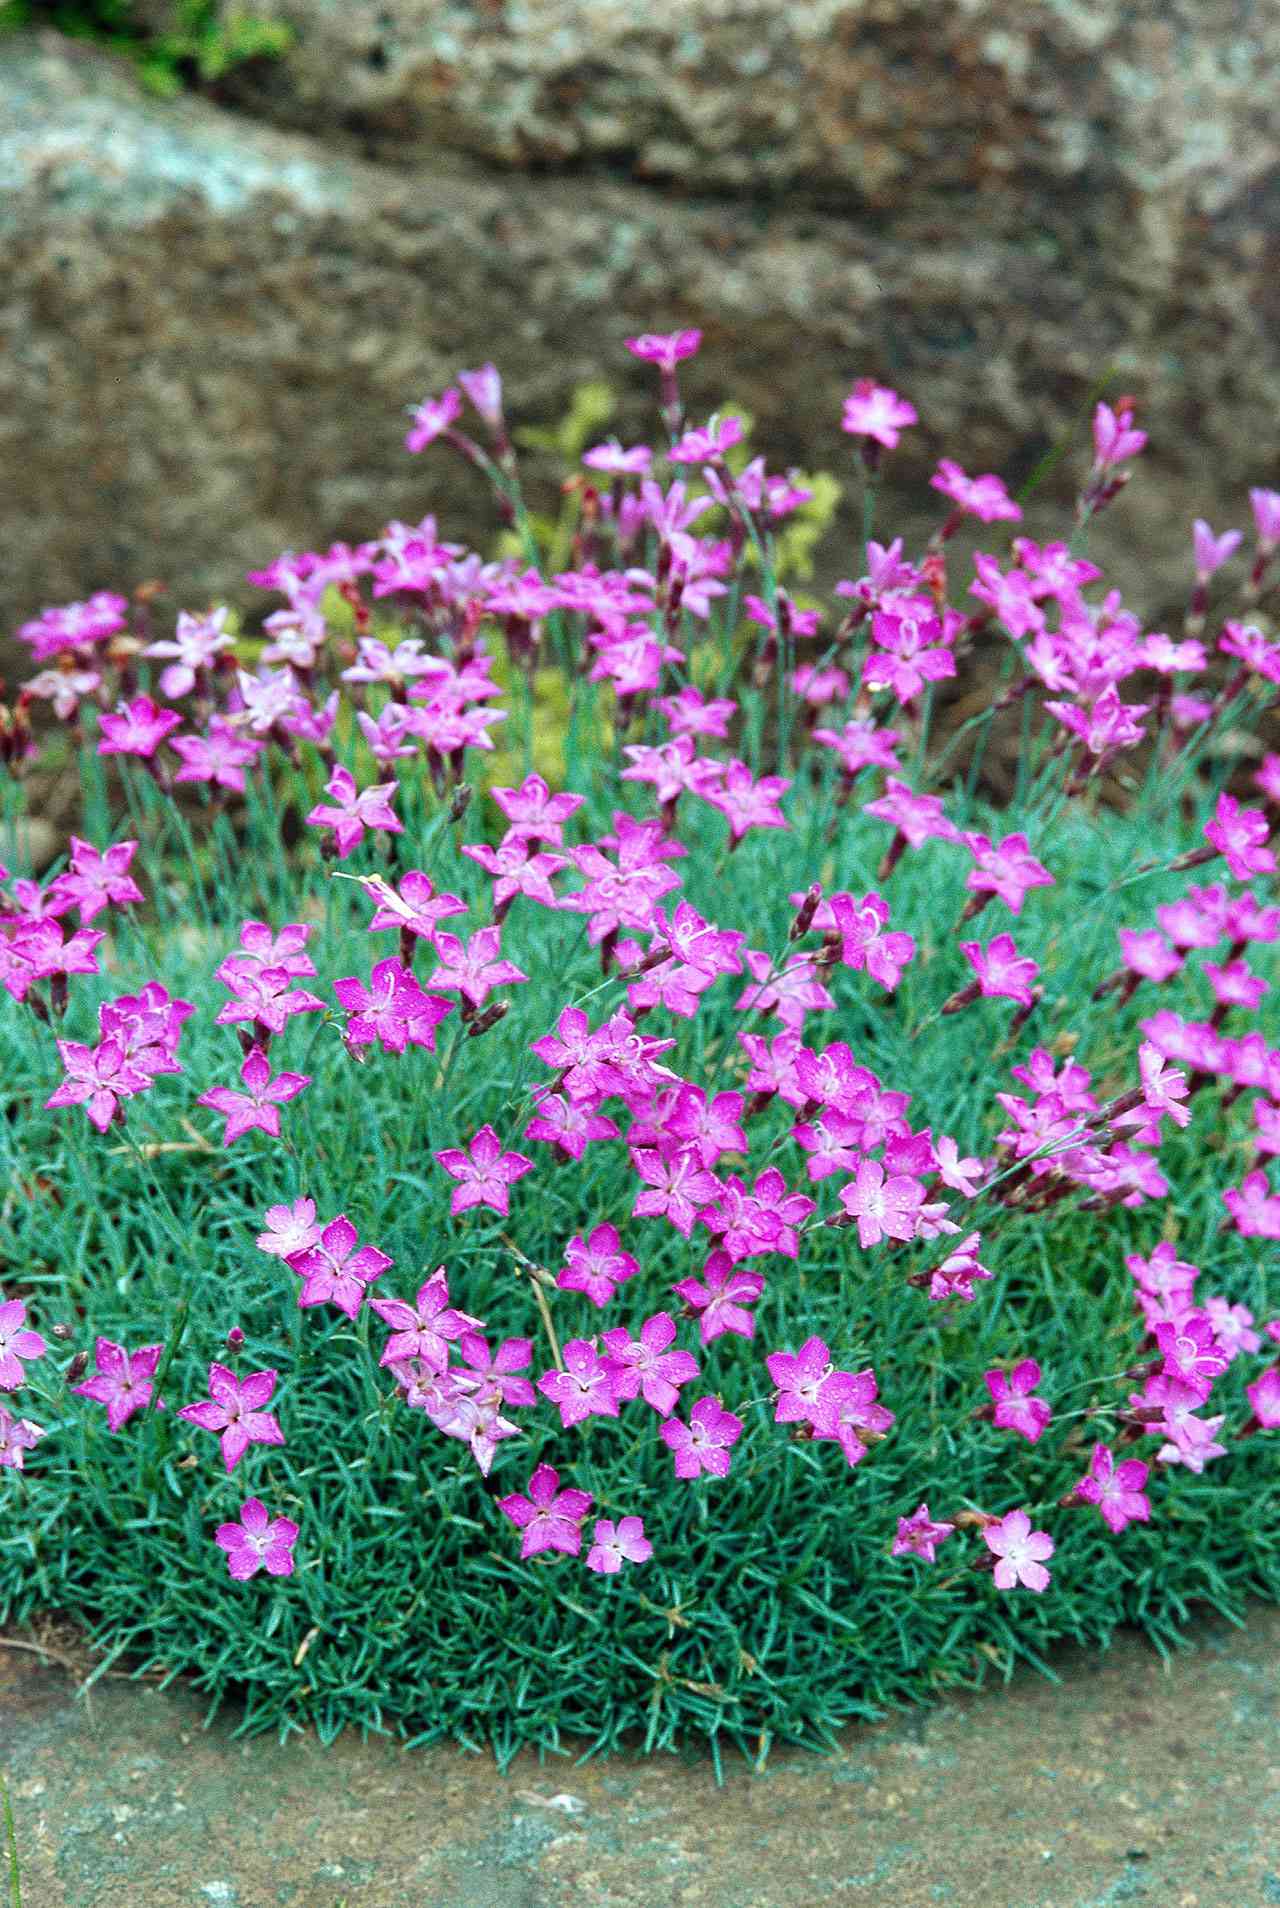 Drought Tolerant Groundcovers Better, Pink Ground Cover Plants